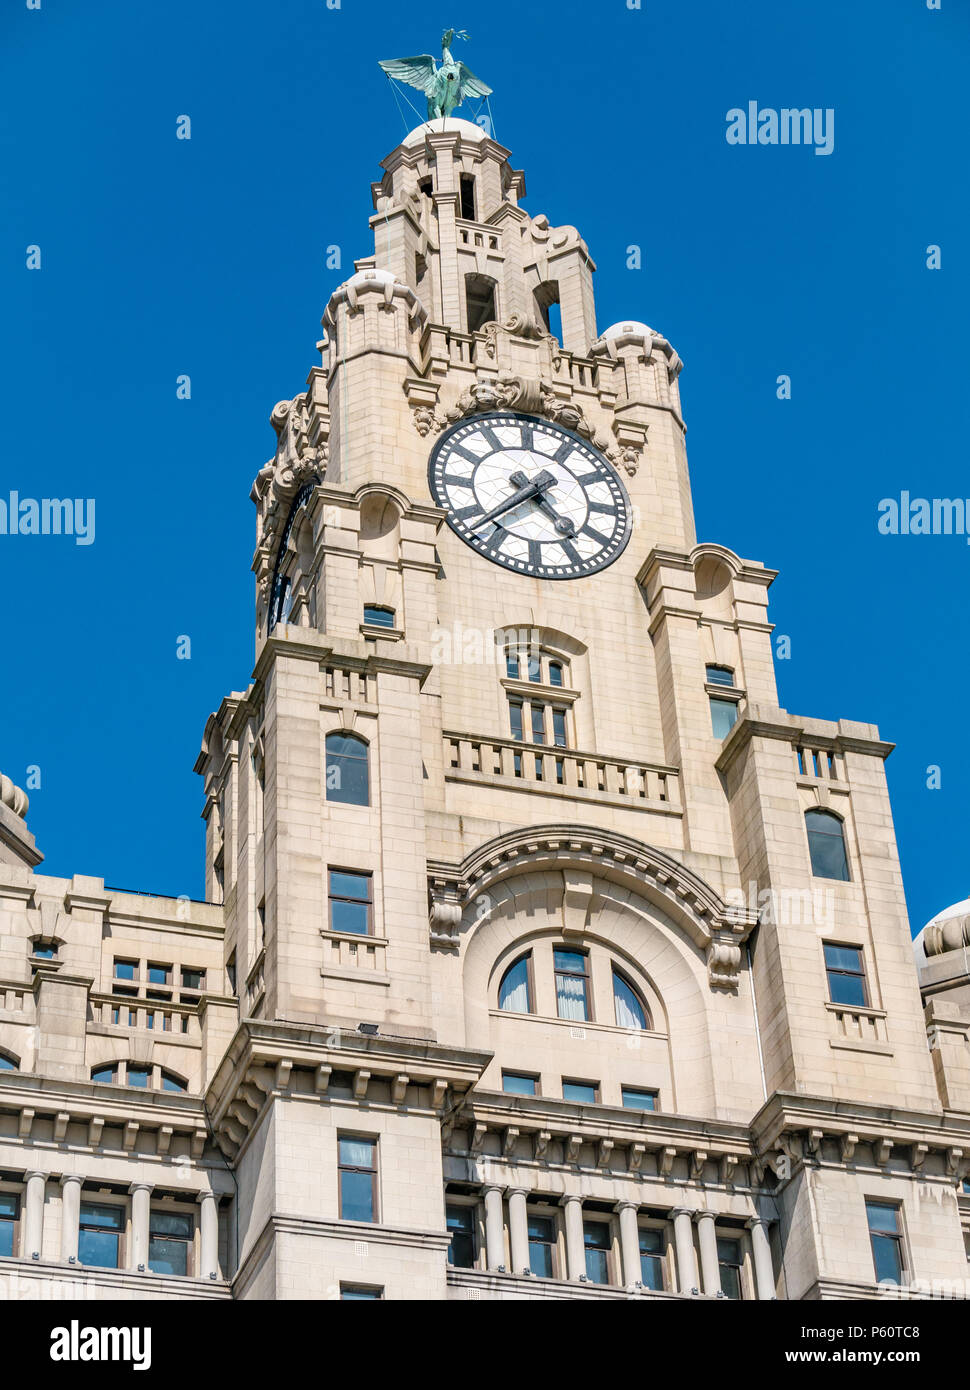 View of one of Three Graces, Royal Liver building, Pier Head, Liverpool, England, UK with largest UK clock and cormorant Liver bird Stock Photo